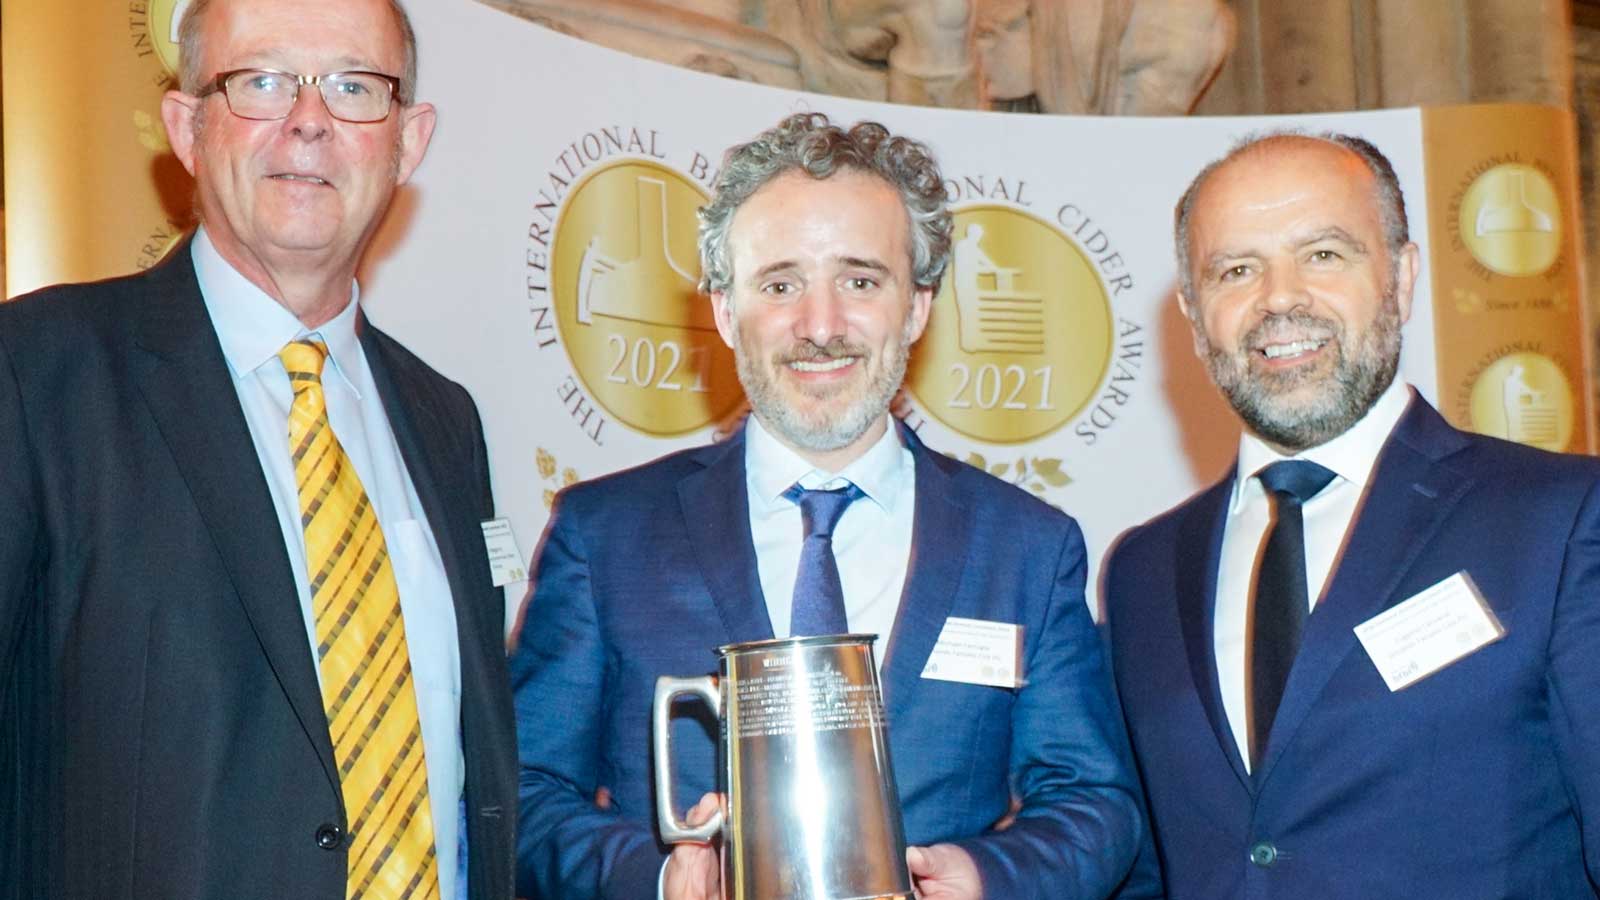 Cisk 0.0 collects Gold at the ‘Oscars’ of the brewing industry ceremon y held in London